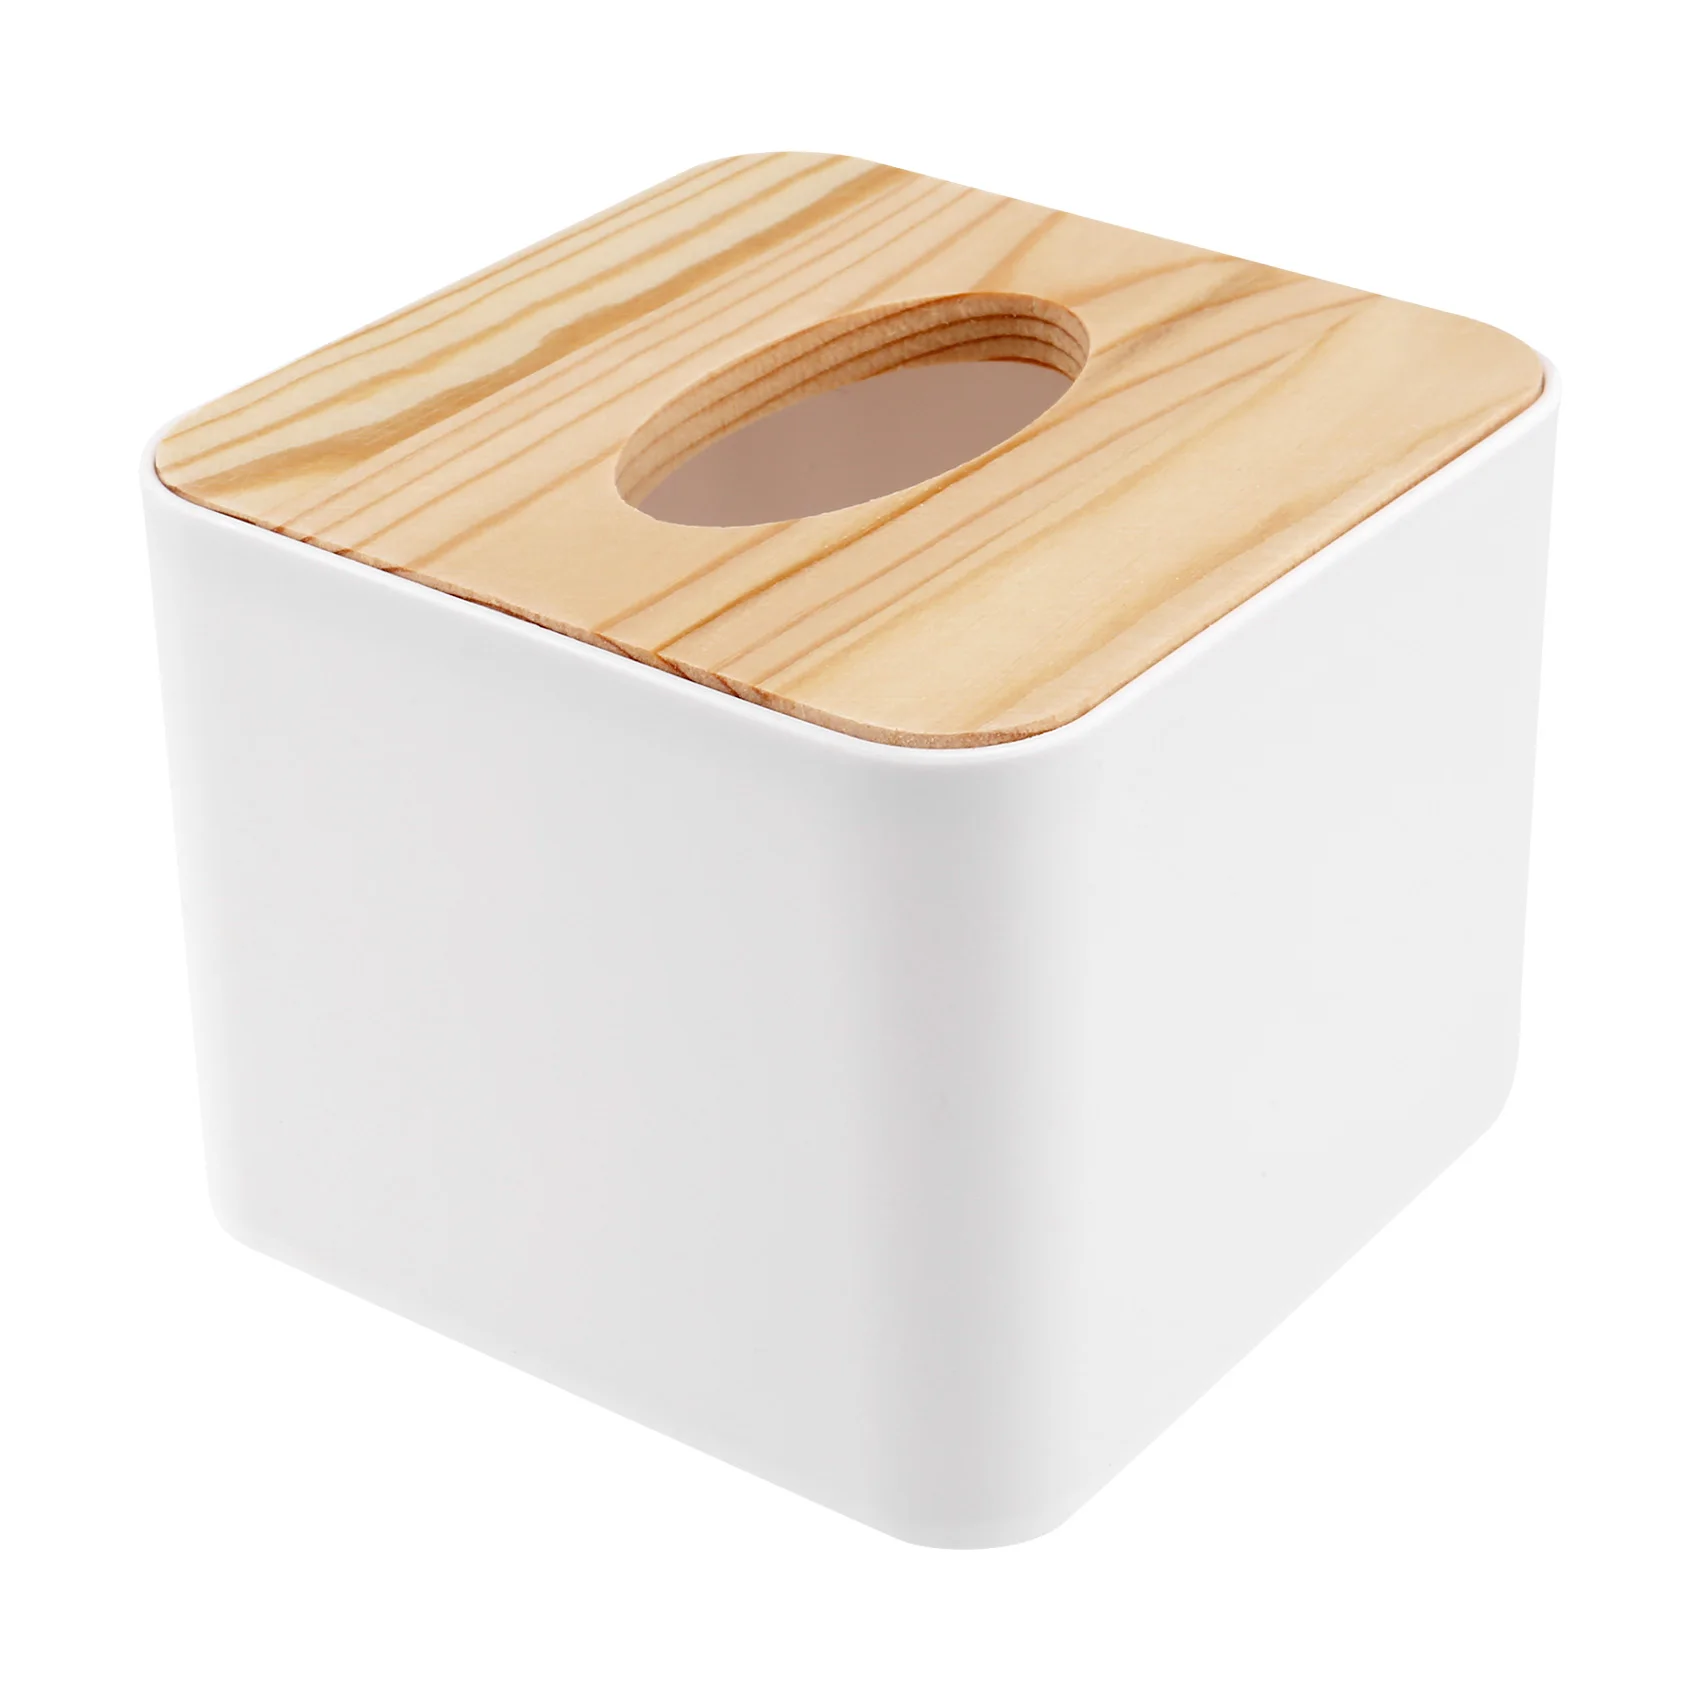 

Square Tissue Box Tissue Box with Wooden Lid Household Removable Mini Wooden Tissue Box